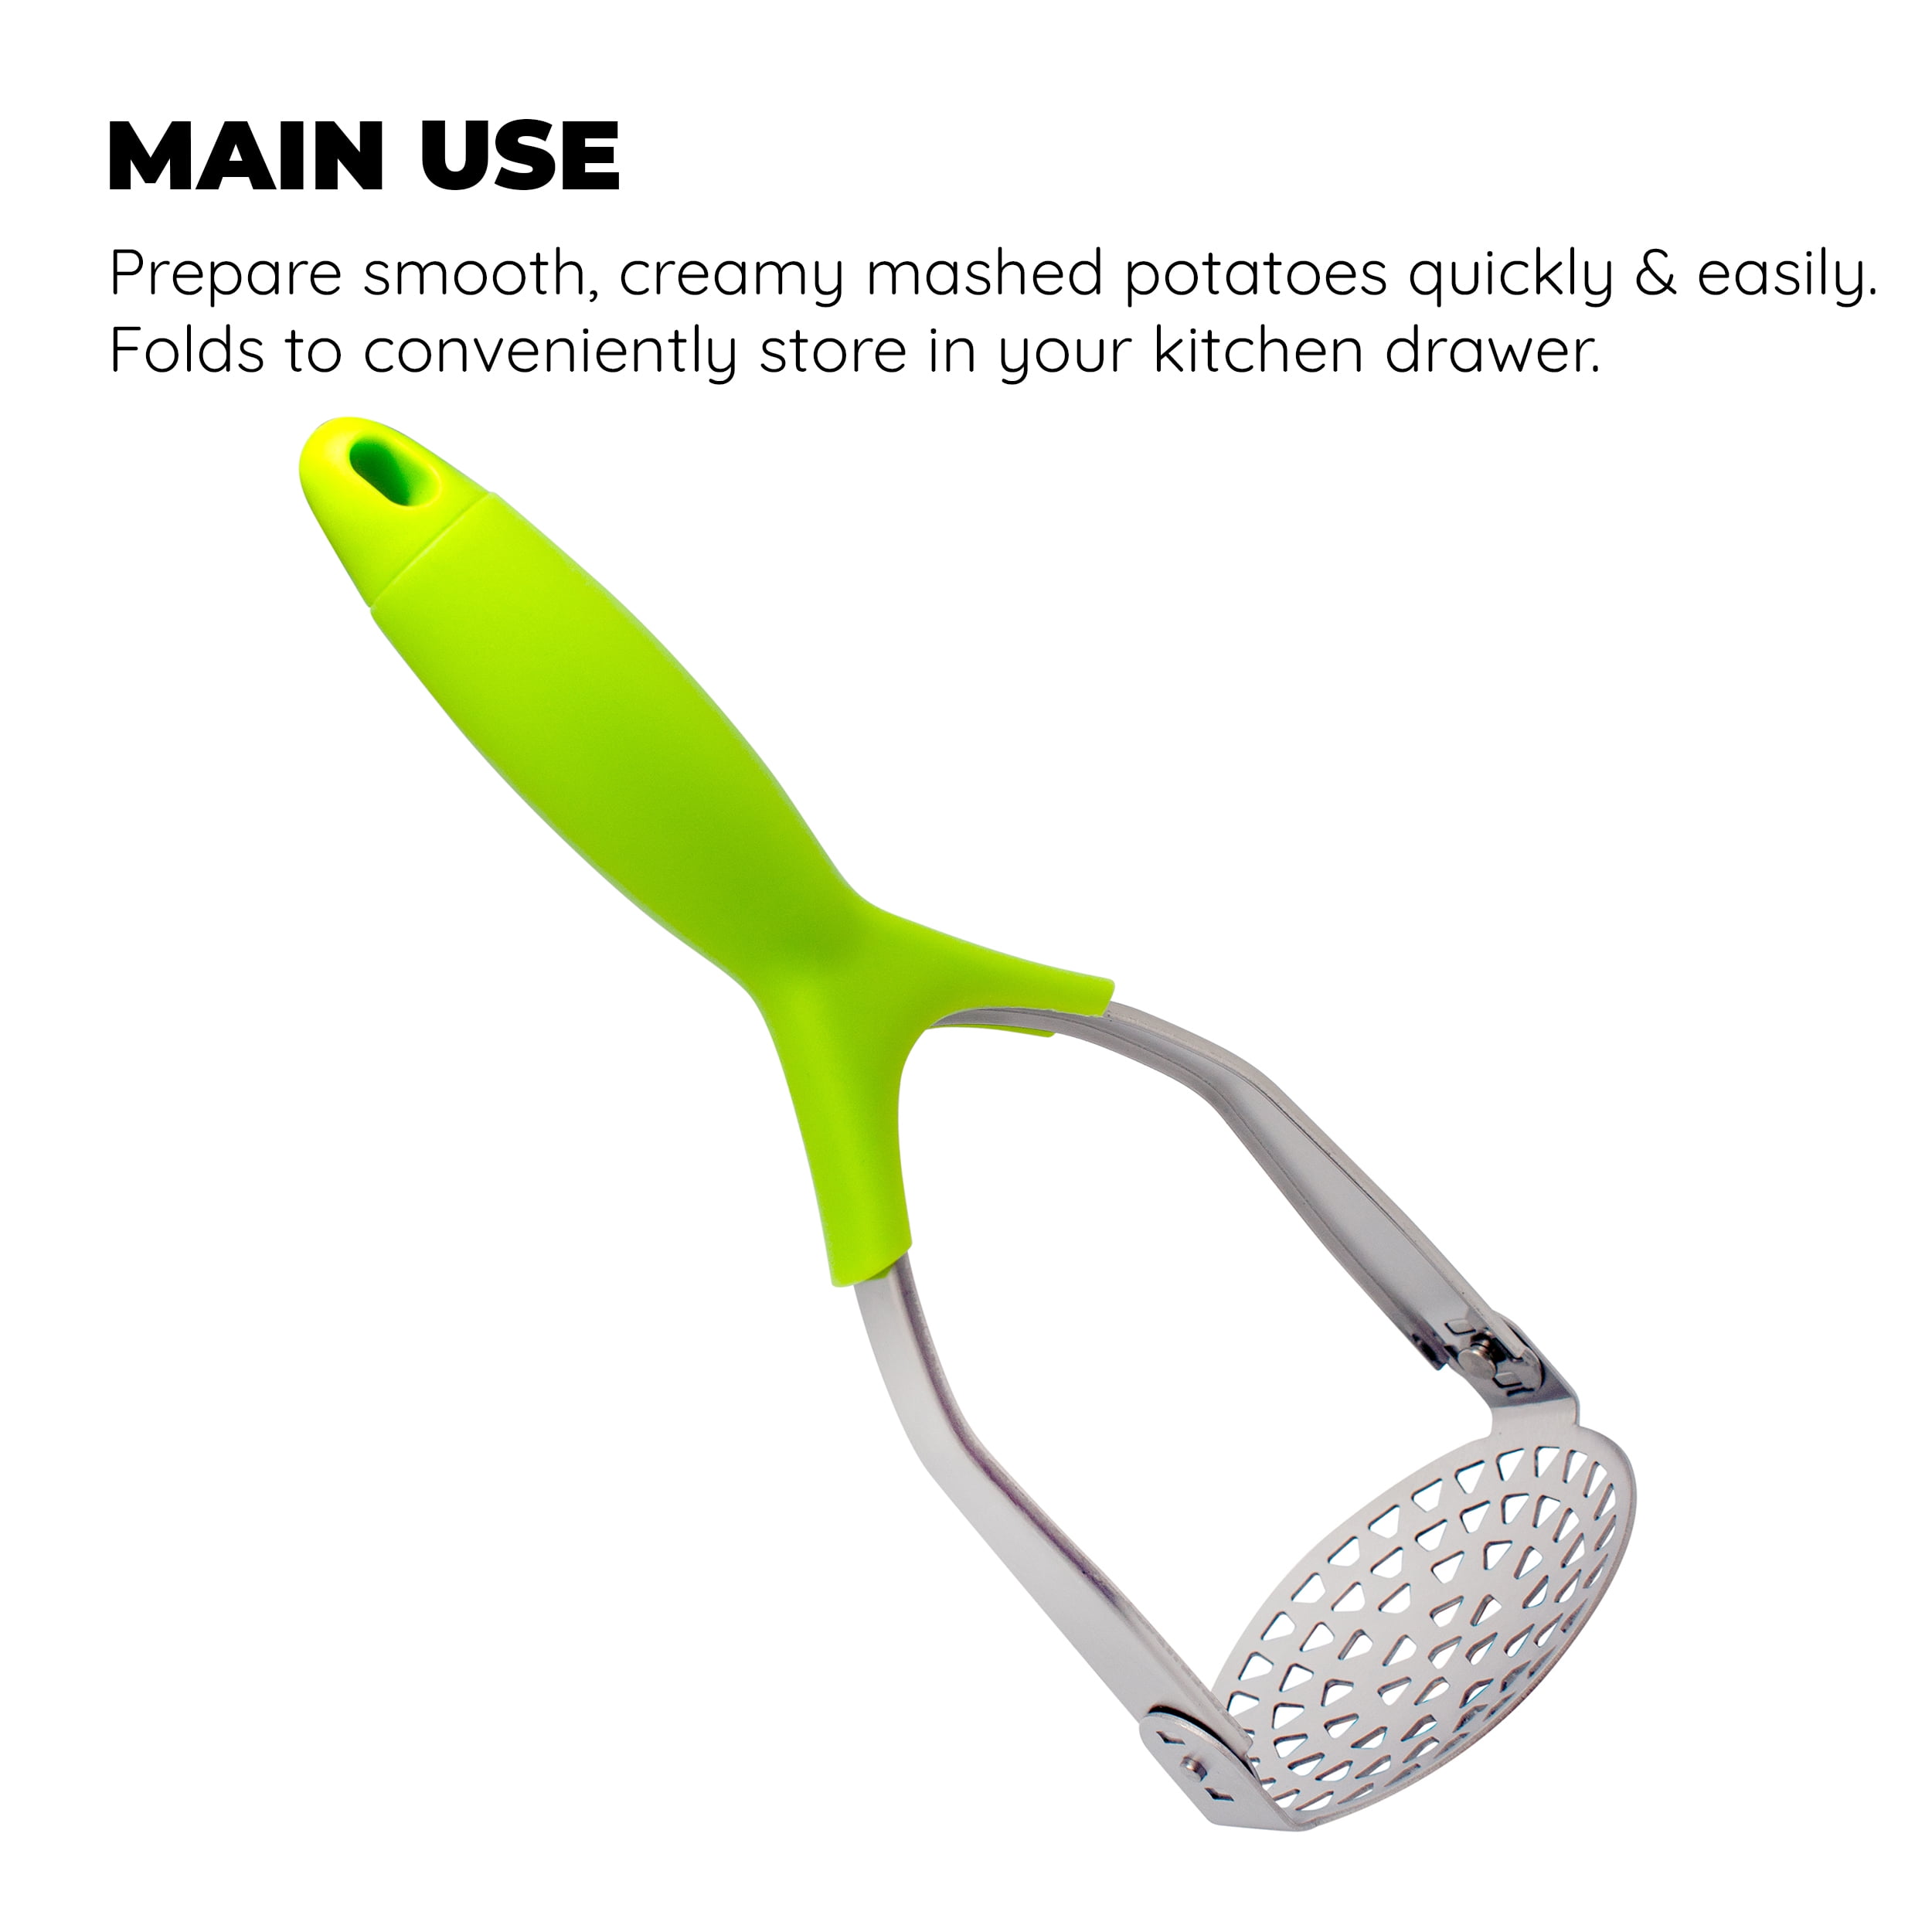 Stainless Steel Potato Masher - Ergonomic Design Sturdy Construction Long&comfortable Grip - Manual Masher by Meaartem